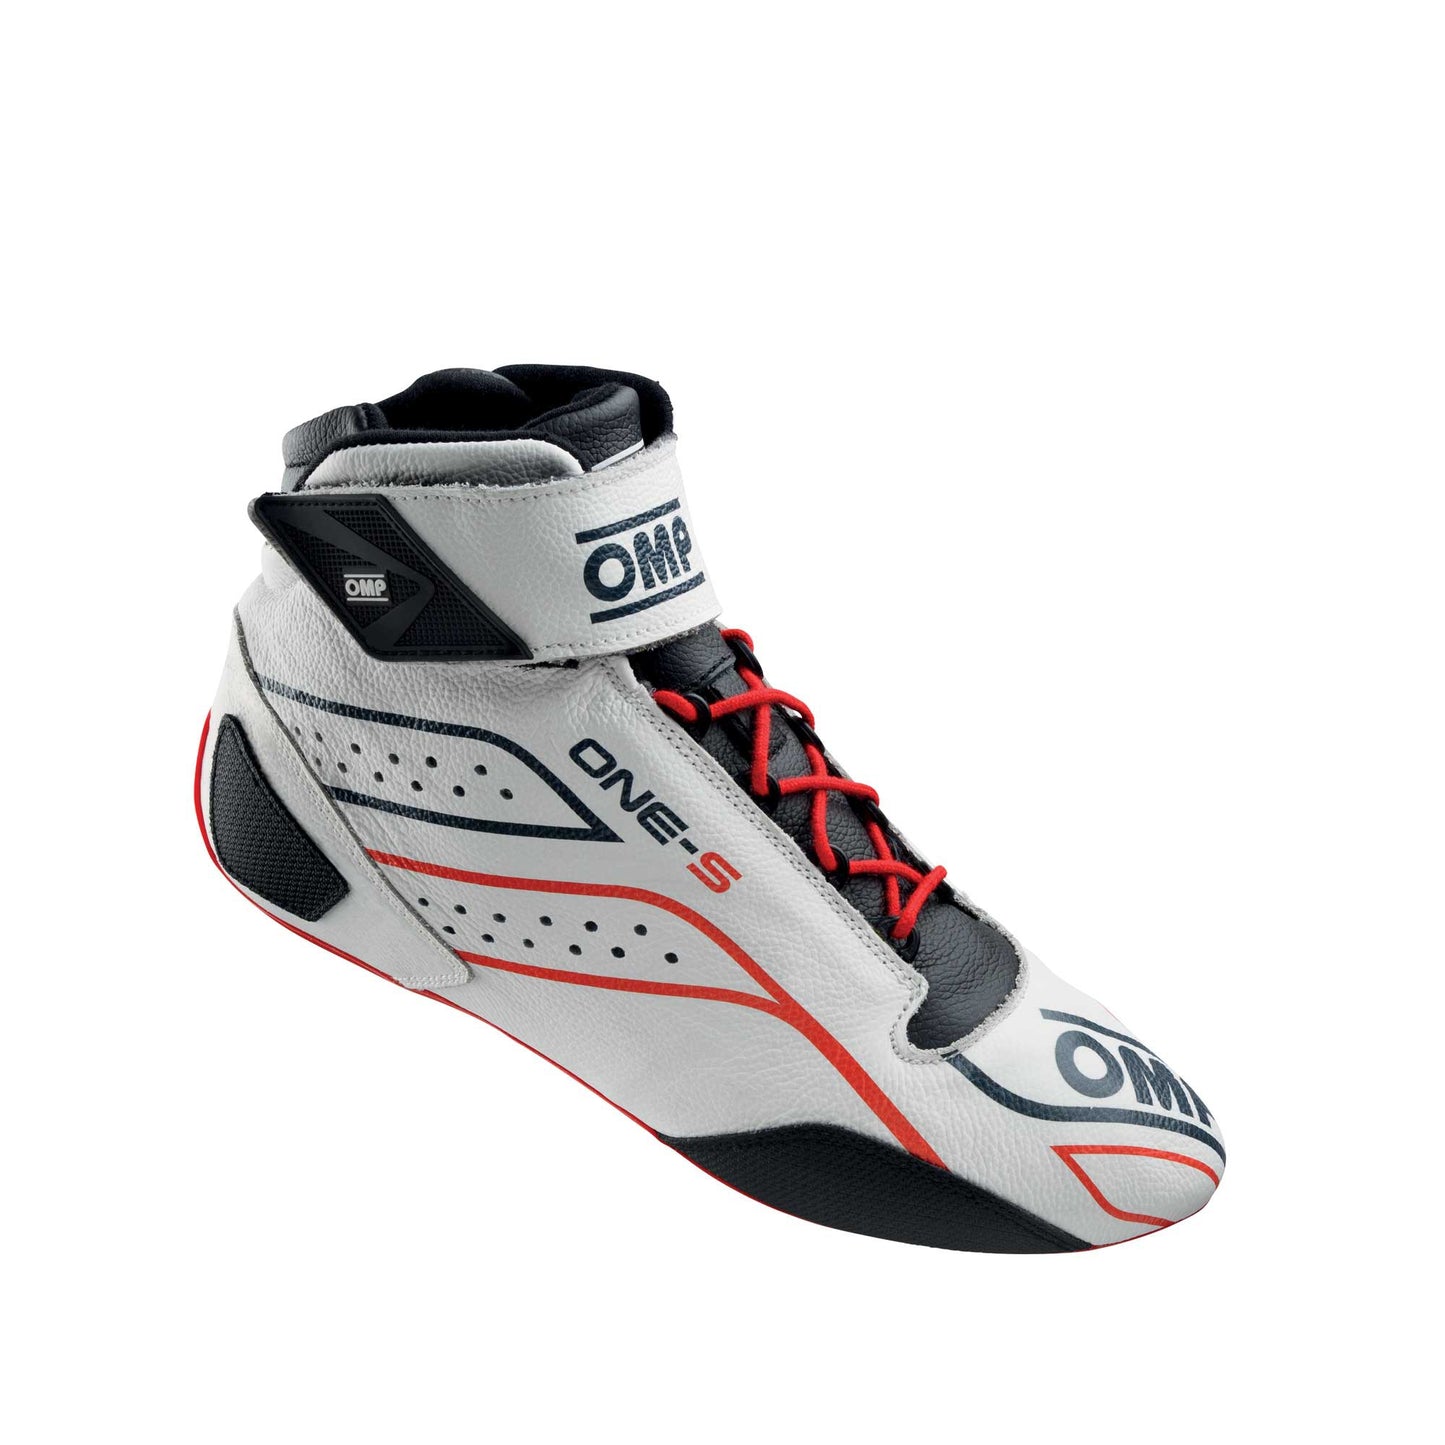 OMP ONE S RACE BOOTS